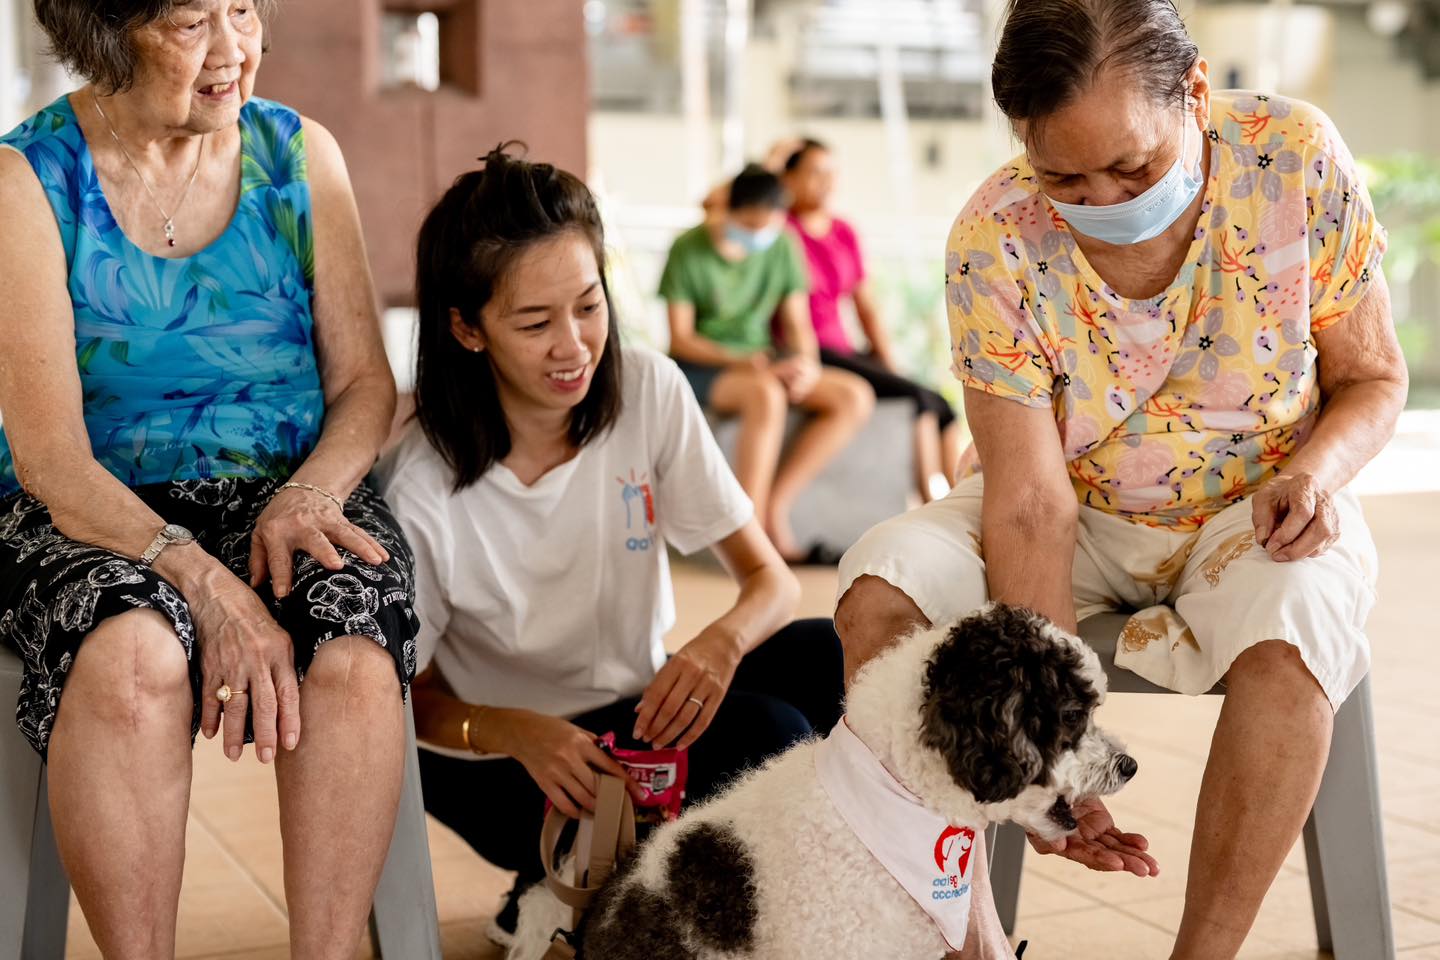 A handler sits between to residents of Care Corner with a dog.